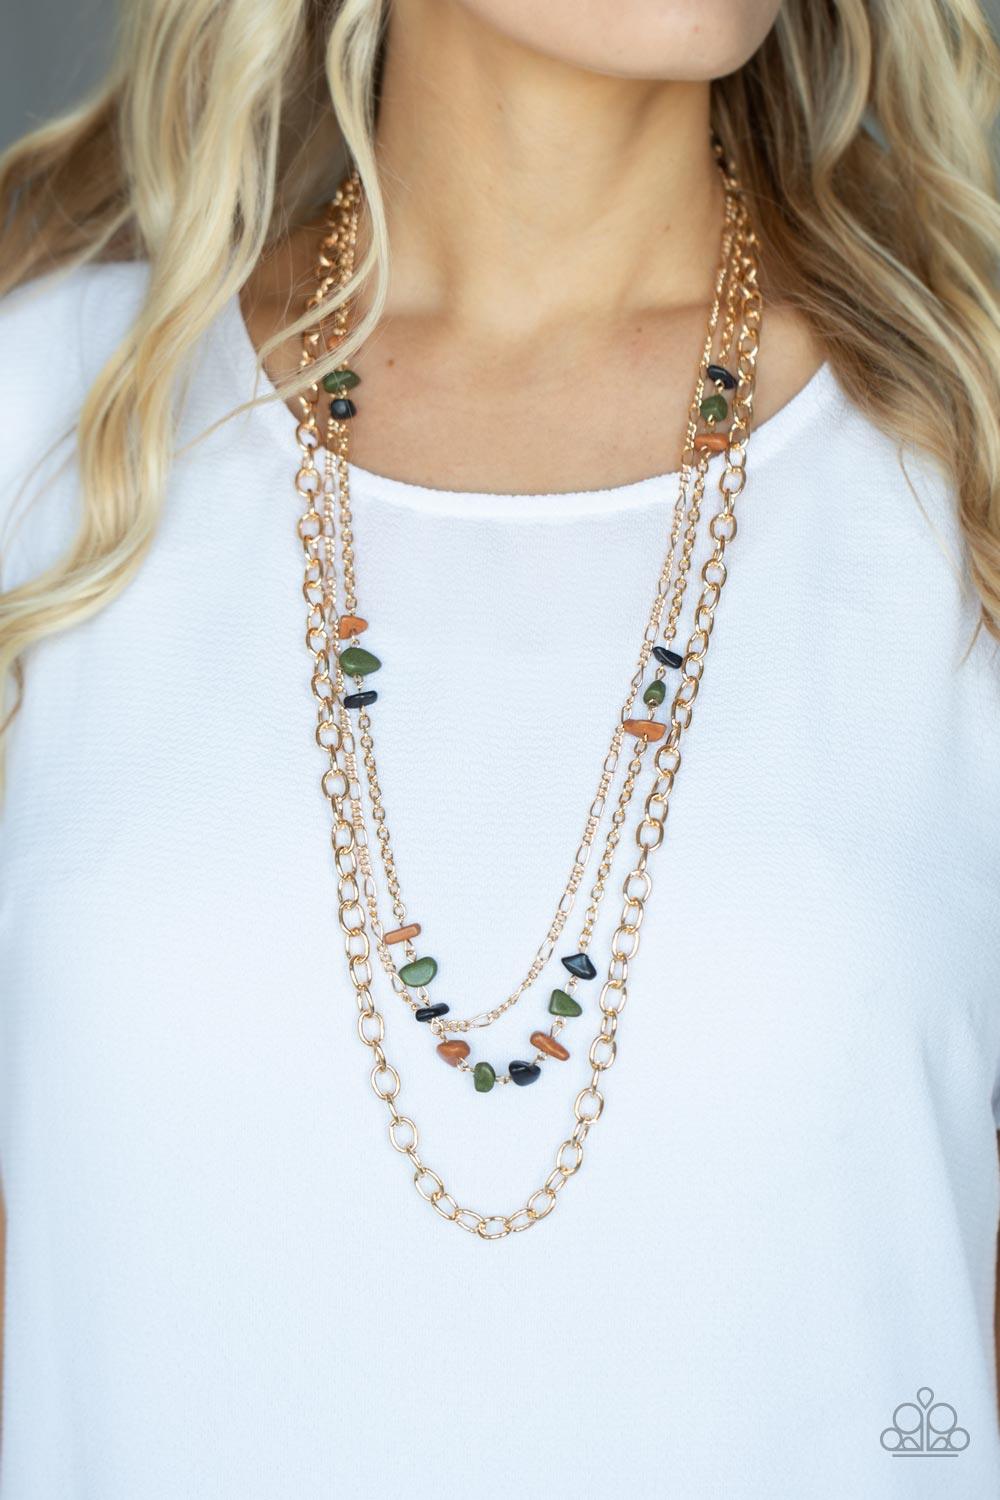 Paparazzi Accessories Artisanal Abundance - Multi Infused with sections of earthy brown, black, and green stones, a trio of mismatched gold chains layer down the chest for a dash of rustic refinement. Features an adjustable clasp closure. Sold as one indi